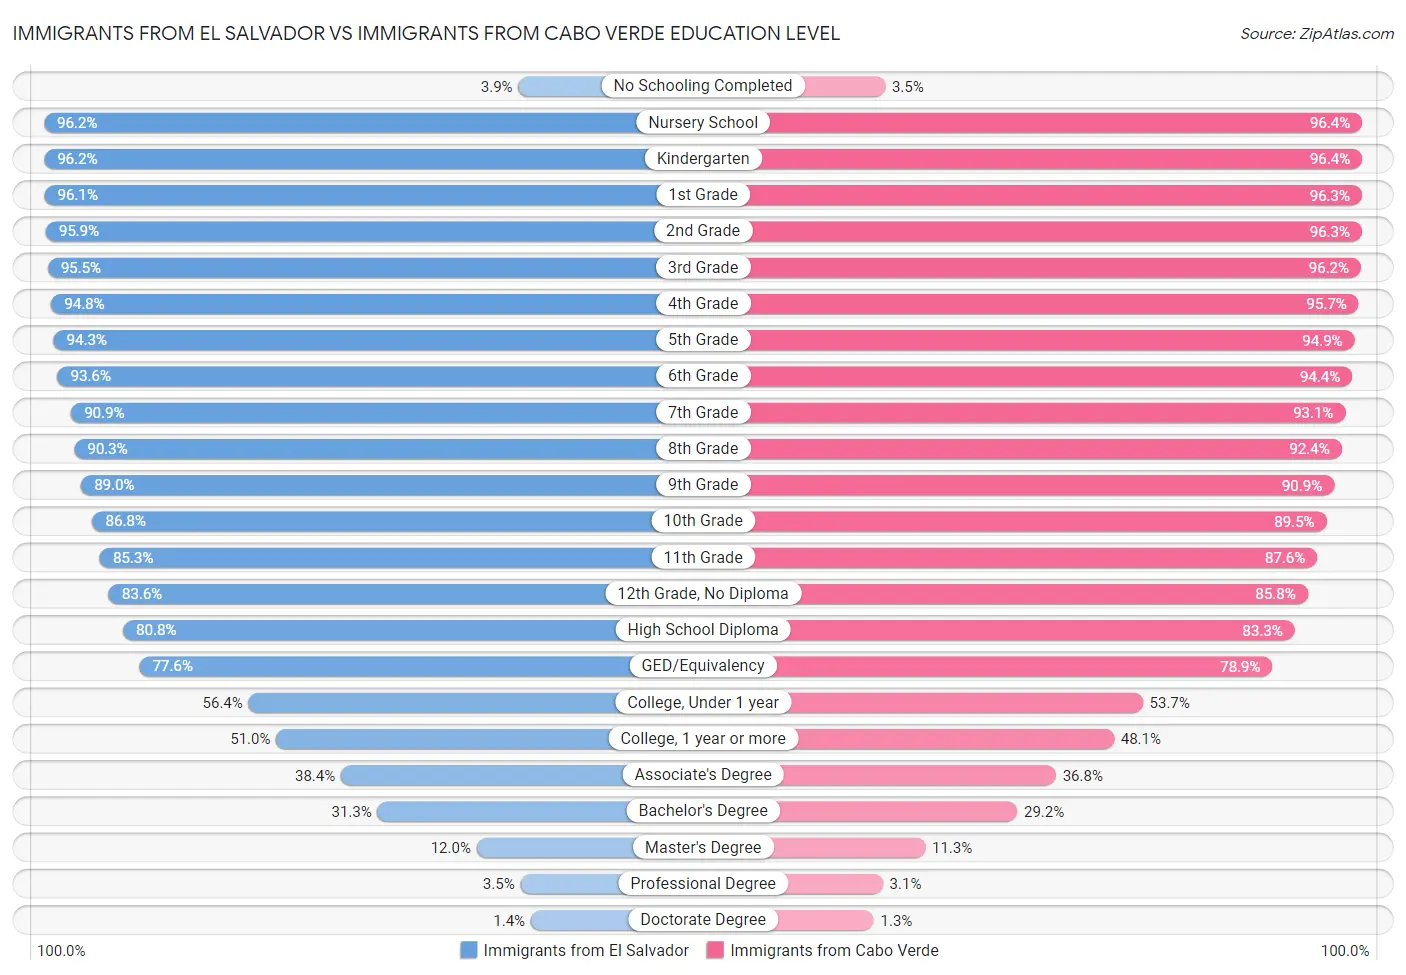 Immigrants from El Salvador vs Immigrants from Cabo Verde Education Level